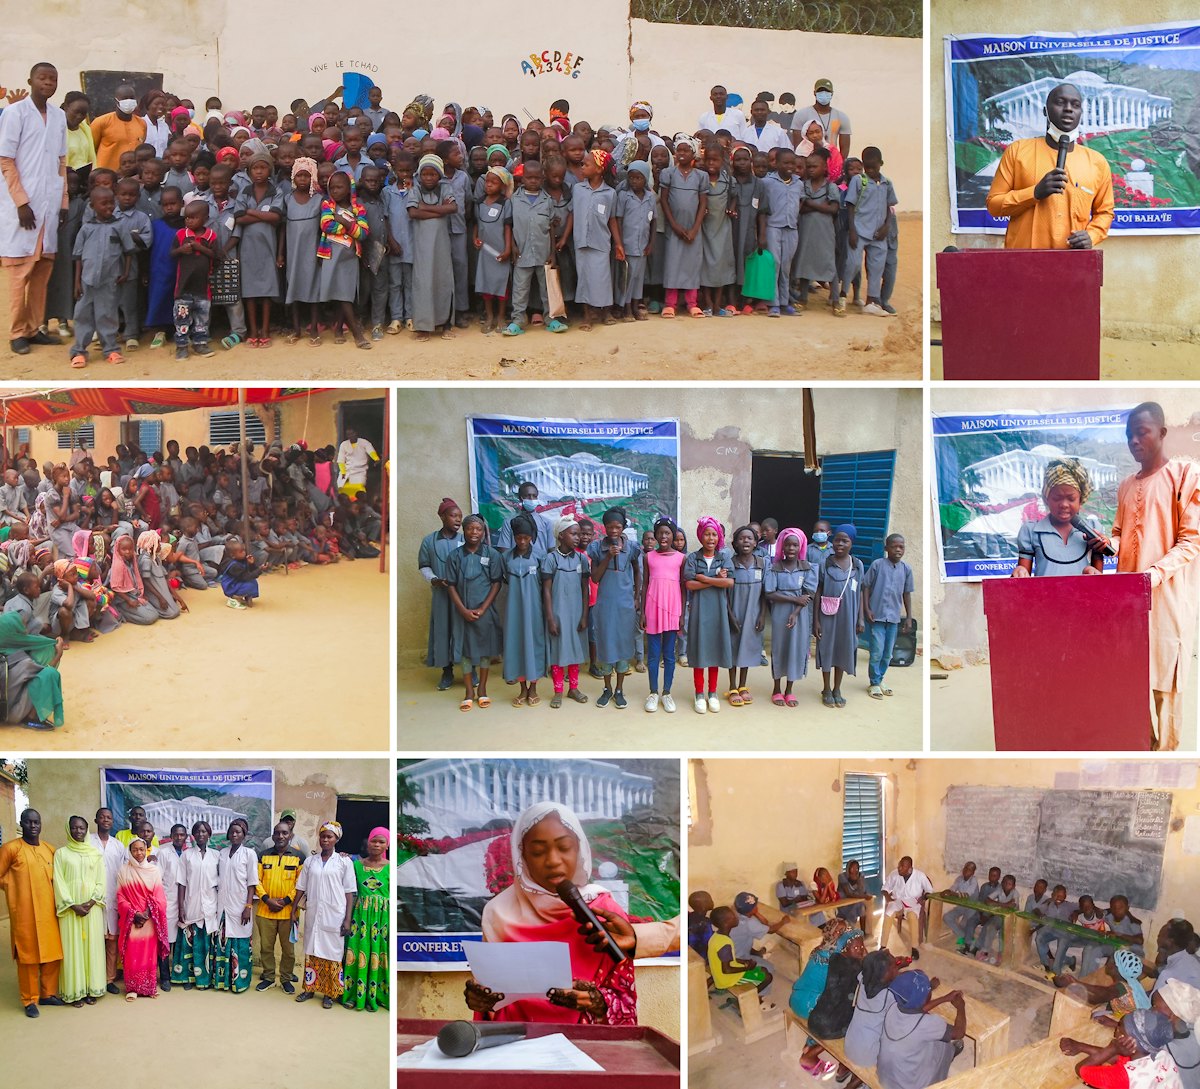 Pictured here is a conference at the Mashiyyat school in Chad in which the same principles discussed in conferences throughout the world were explored by the students and faculty in attendance.